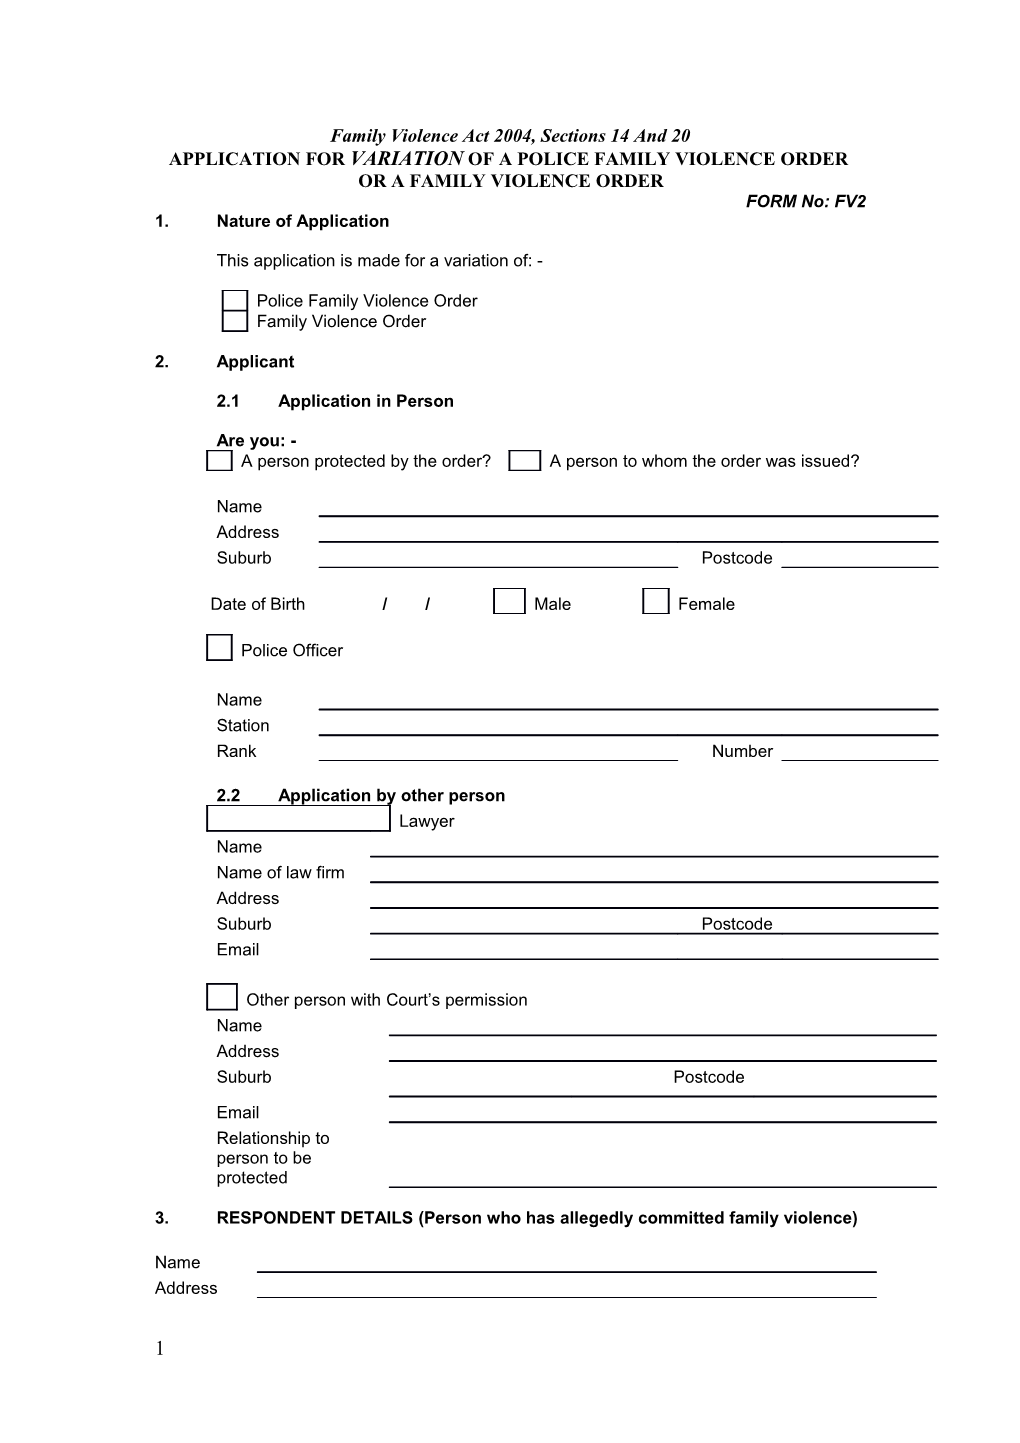 Application for Variation of a Police Family Violence Order Or a Family Violence Order: Form FV2